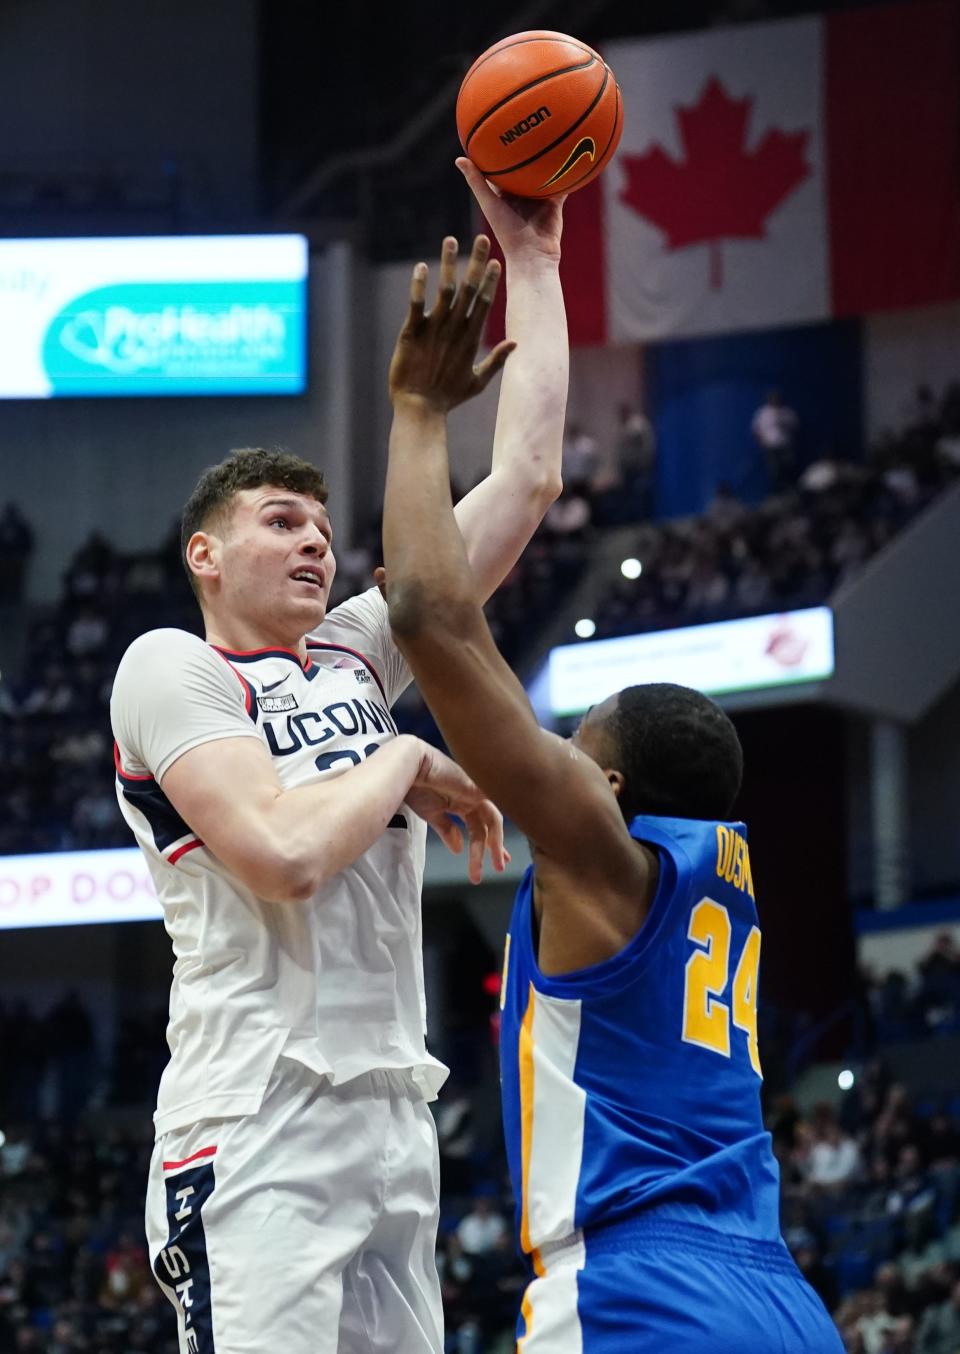 Huskies center Donovan Clingan missed the first game against Xavier, but was a force Sunday with 18 points and eight rebounds.